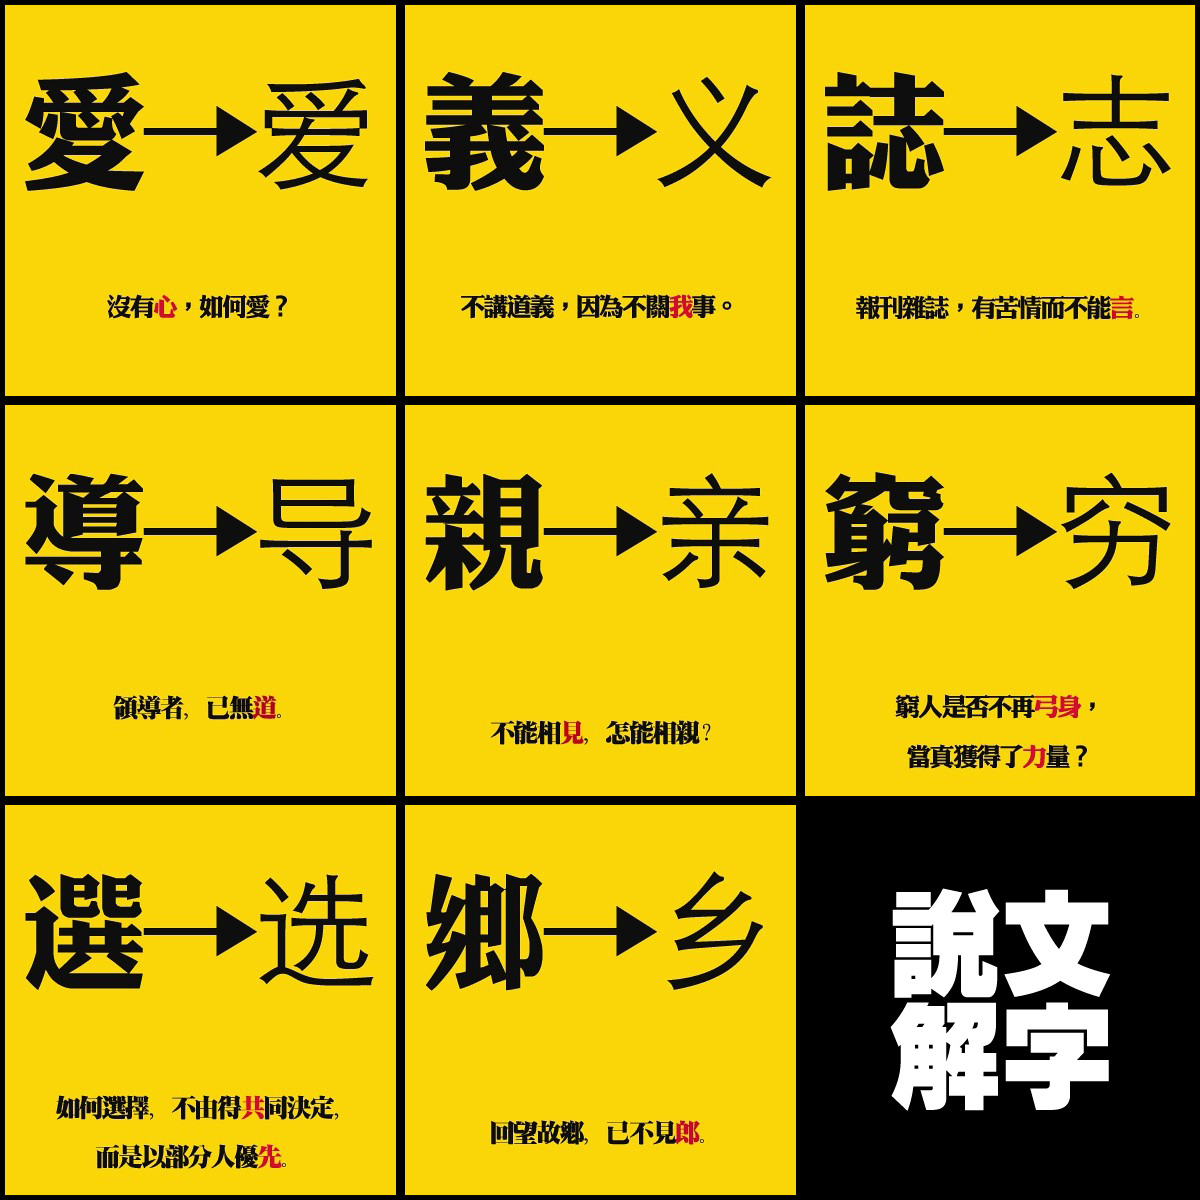 Chinese character symbols milf picture